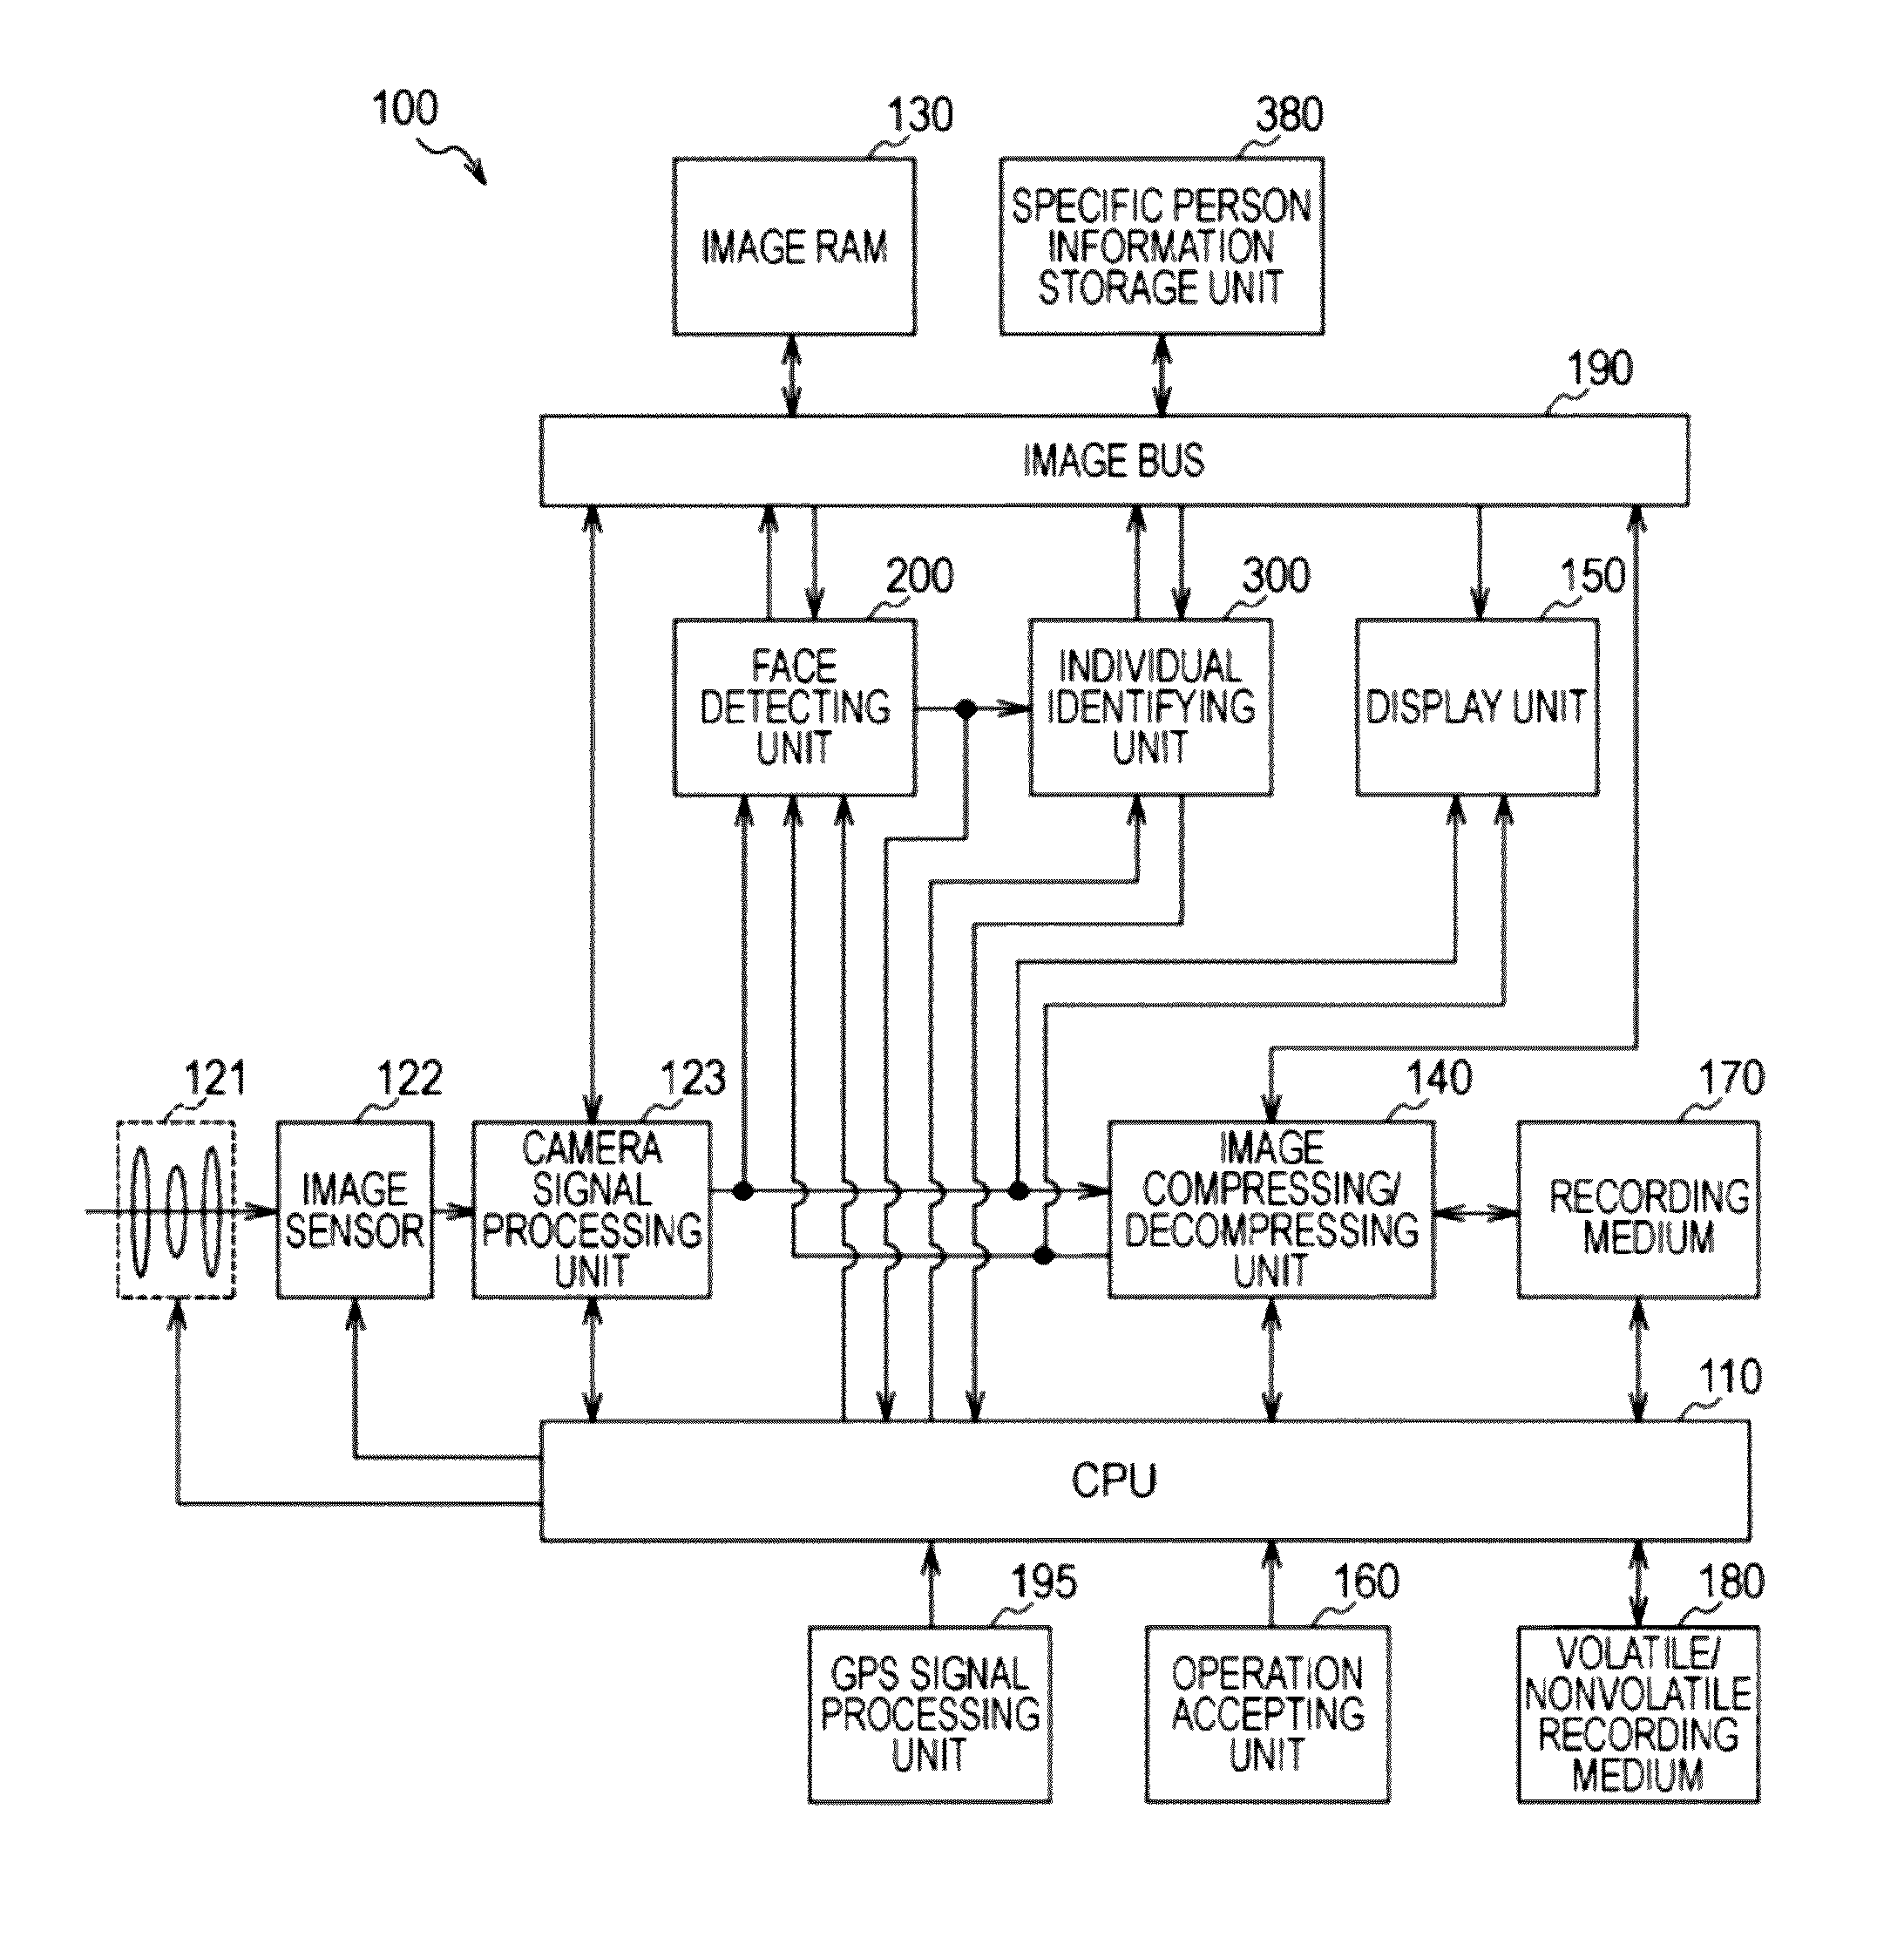 Image processing apparatus and associated methodology for facial recognition